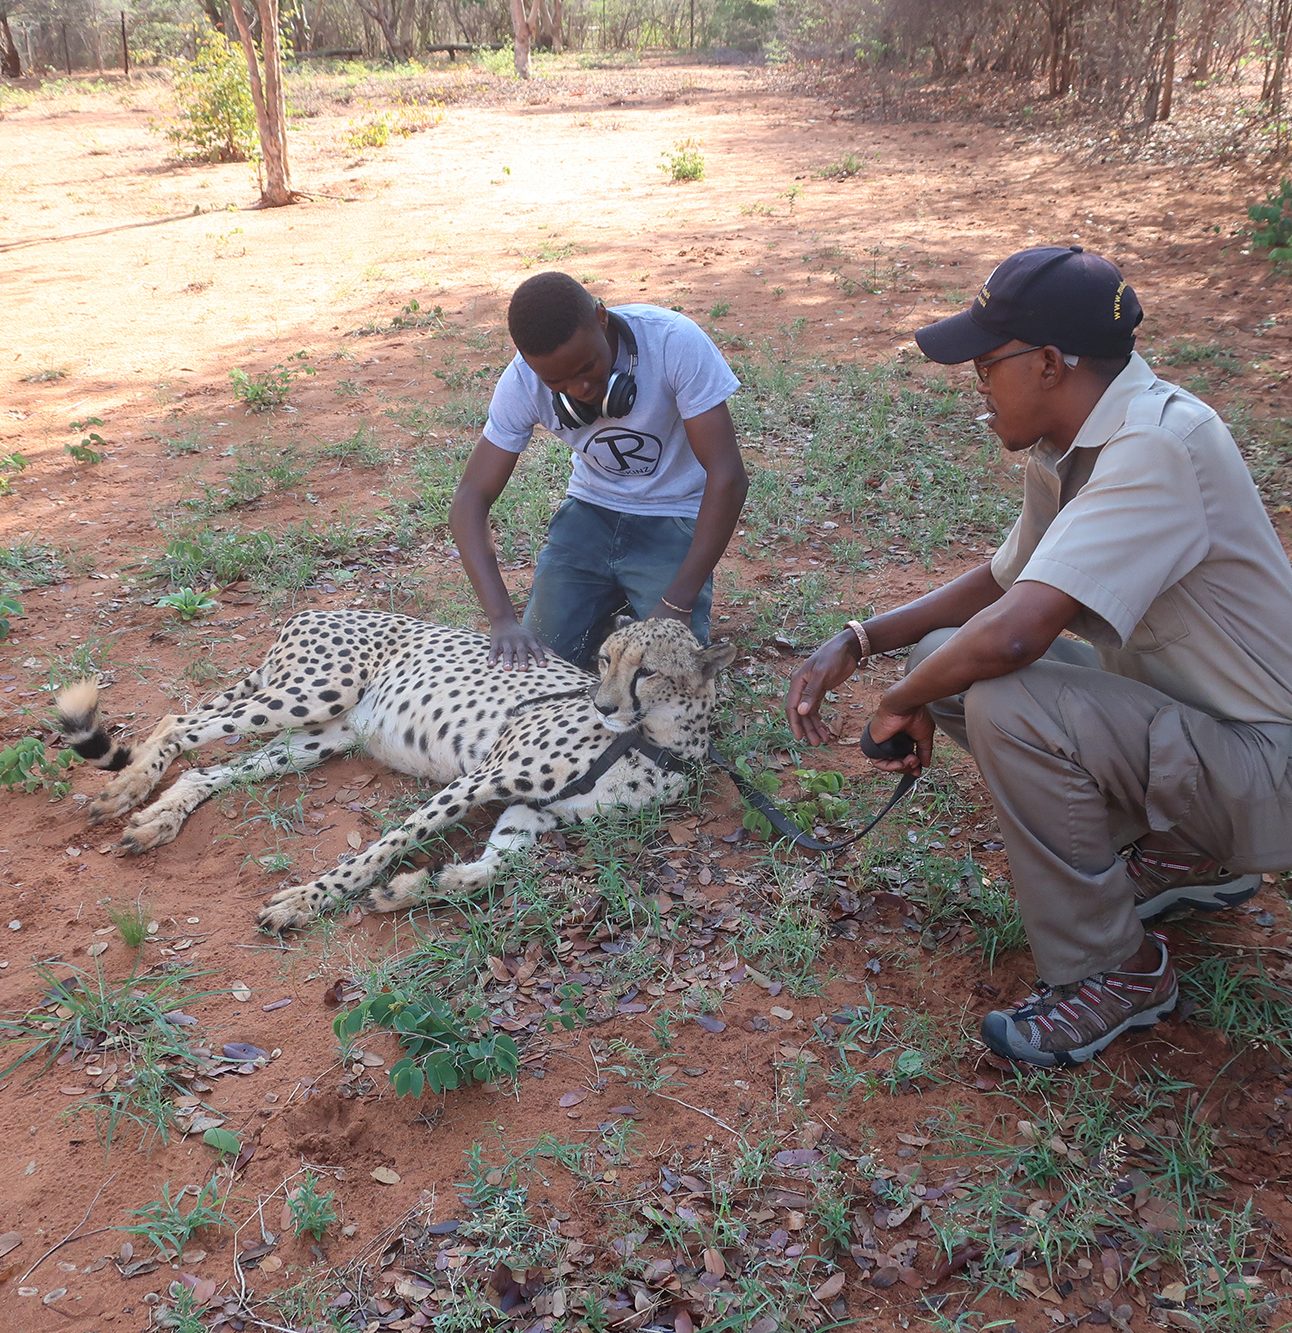 Two men crouch next to a cheetah wearing a collar and leash